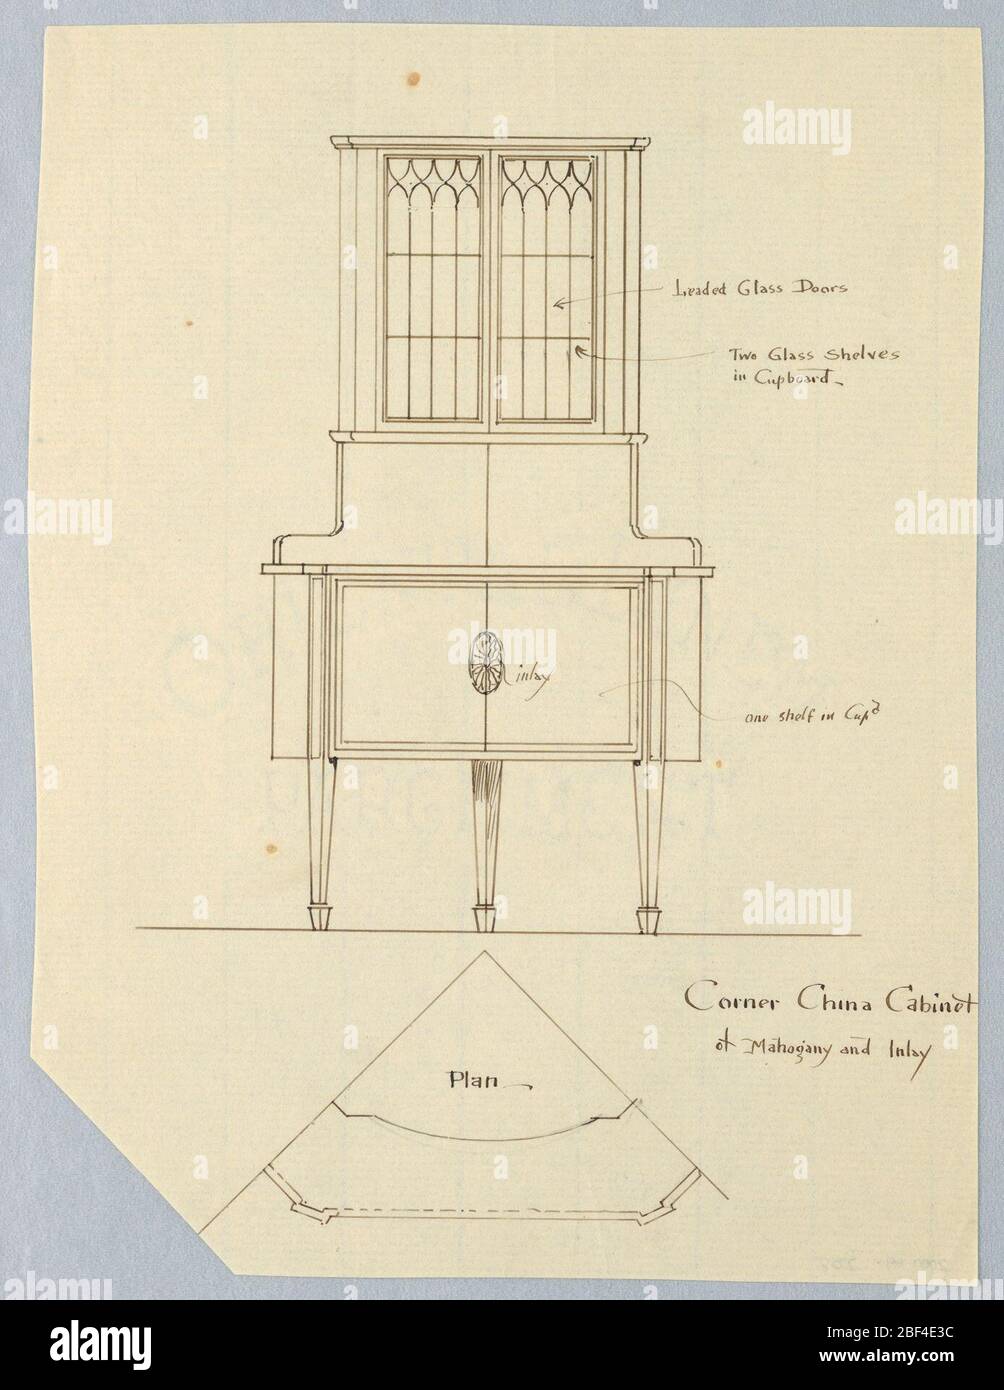 Design for Corner Cabinet in Mahogany and Inlay Plan and Elevation. Elevation: tall cabinet raised on 3 straight tapering legs; closed cupboard with inlaid patera medallion topped by tall cupboard with glass doors. Plan: triangular shape of cabinet shown; slightly slanted corners. Stock Photo